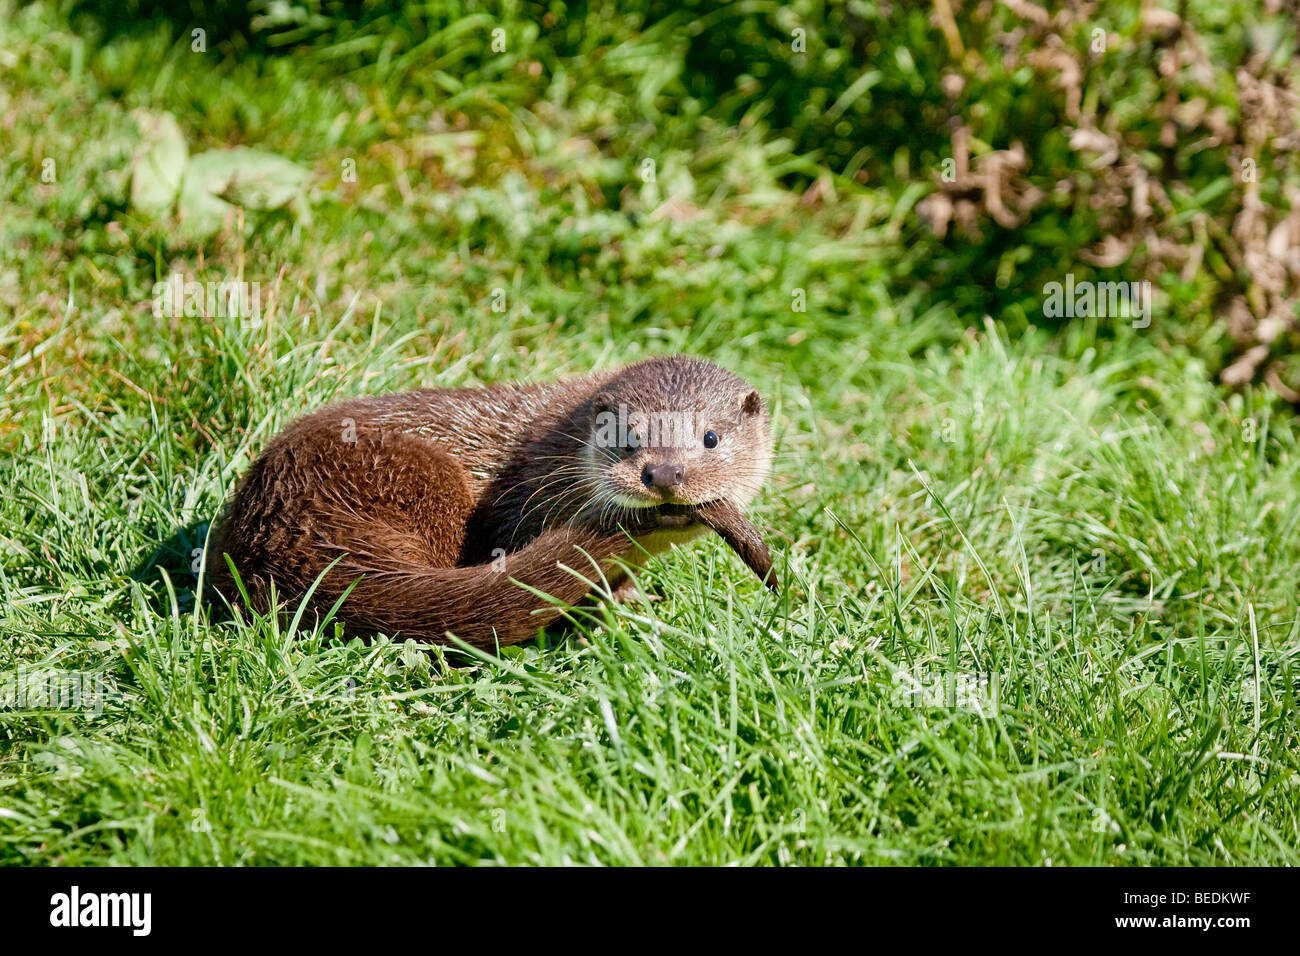 Baby otter cub, Lutra lutra, chasing it's tail Stock Photo